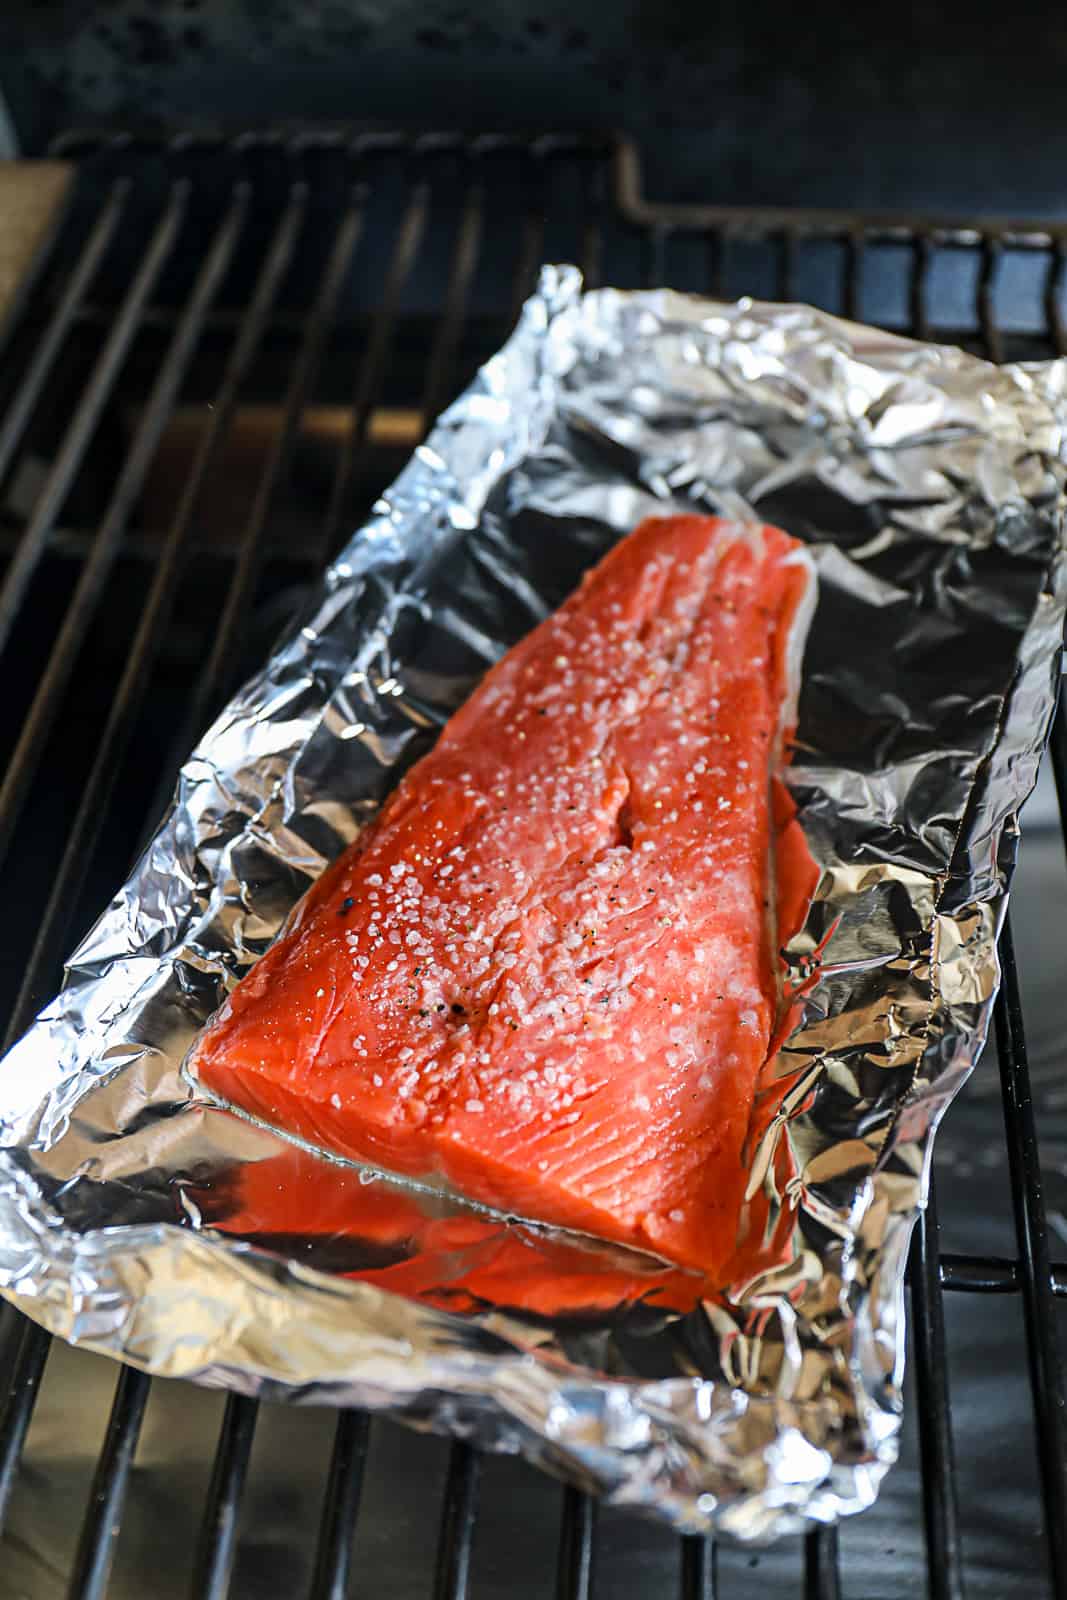 Smoking salmon on foil in a Traeger pellet grill